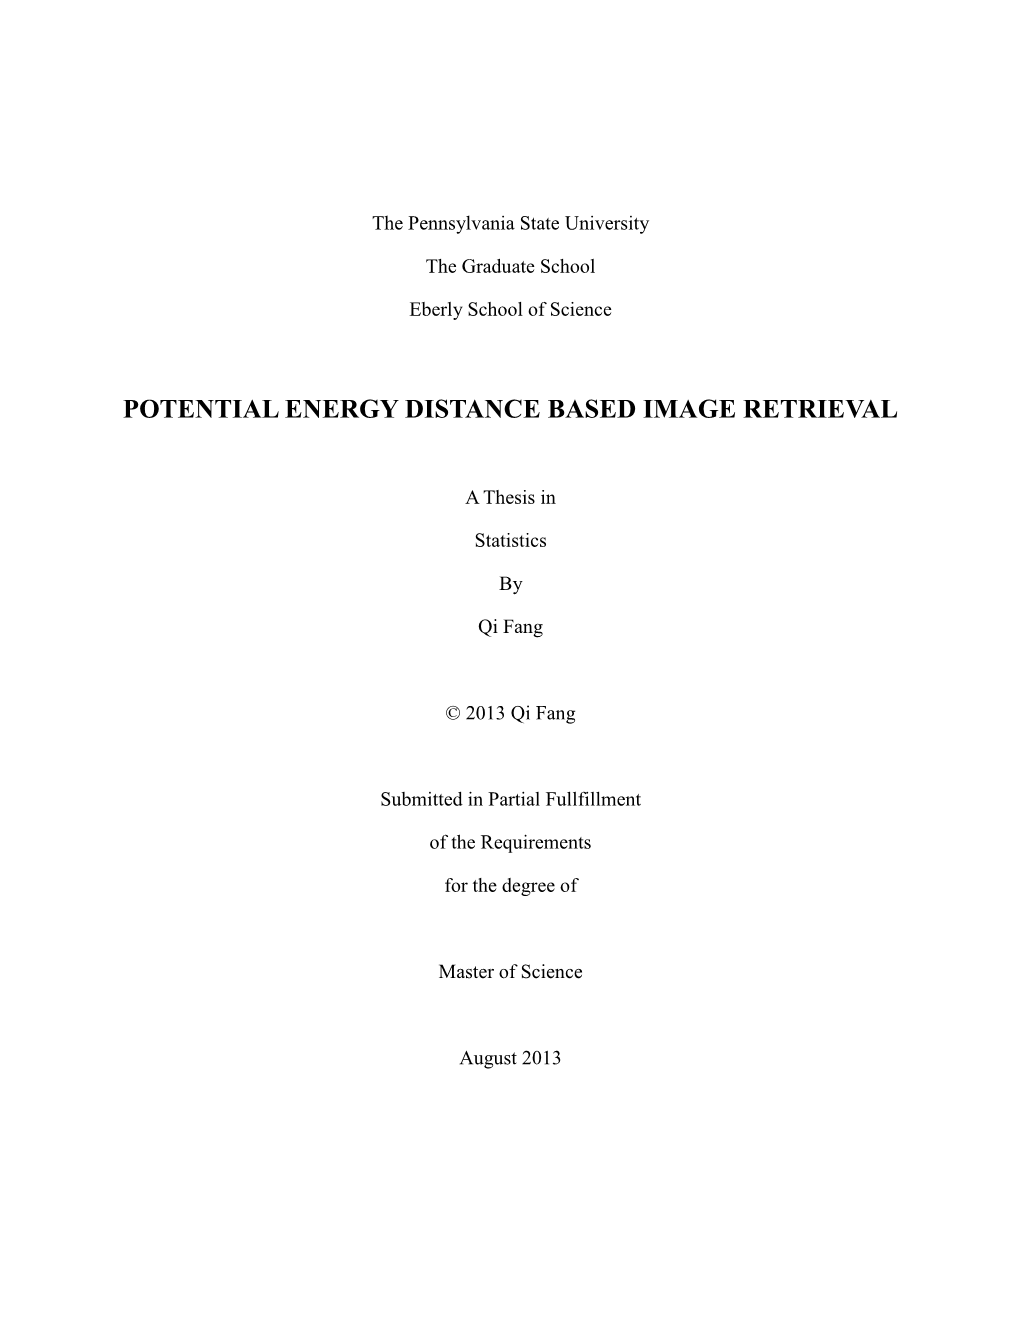 Potential Energy Distance Based Image Retrieval